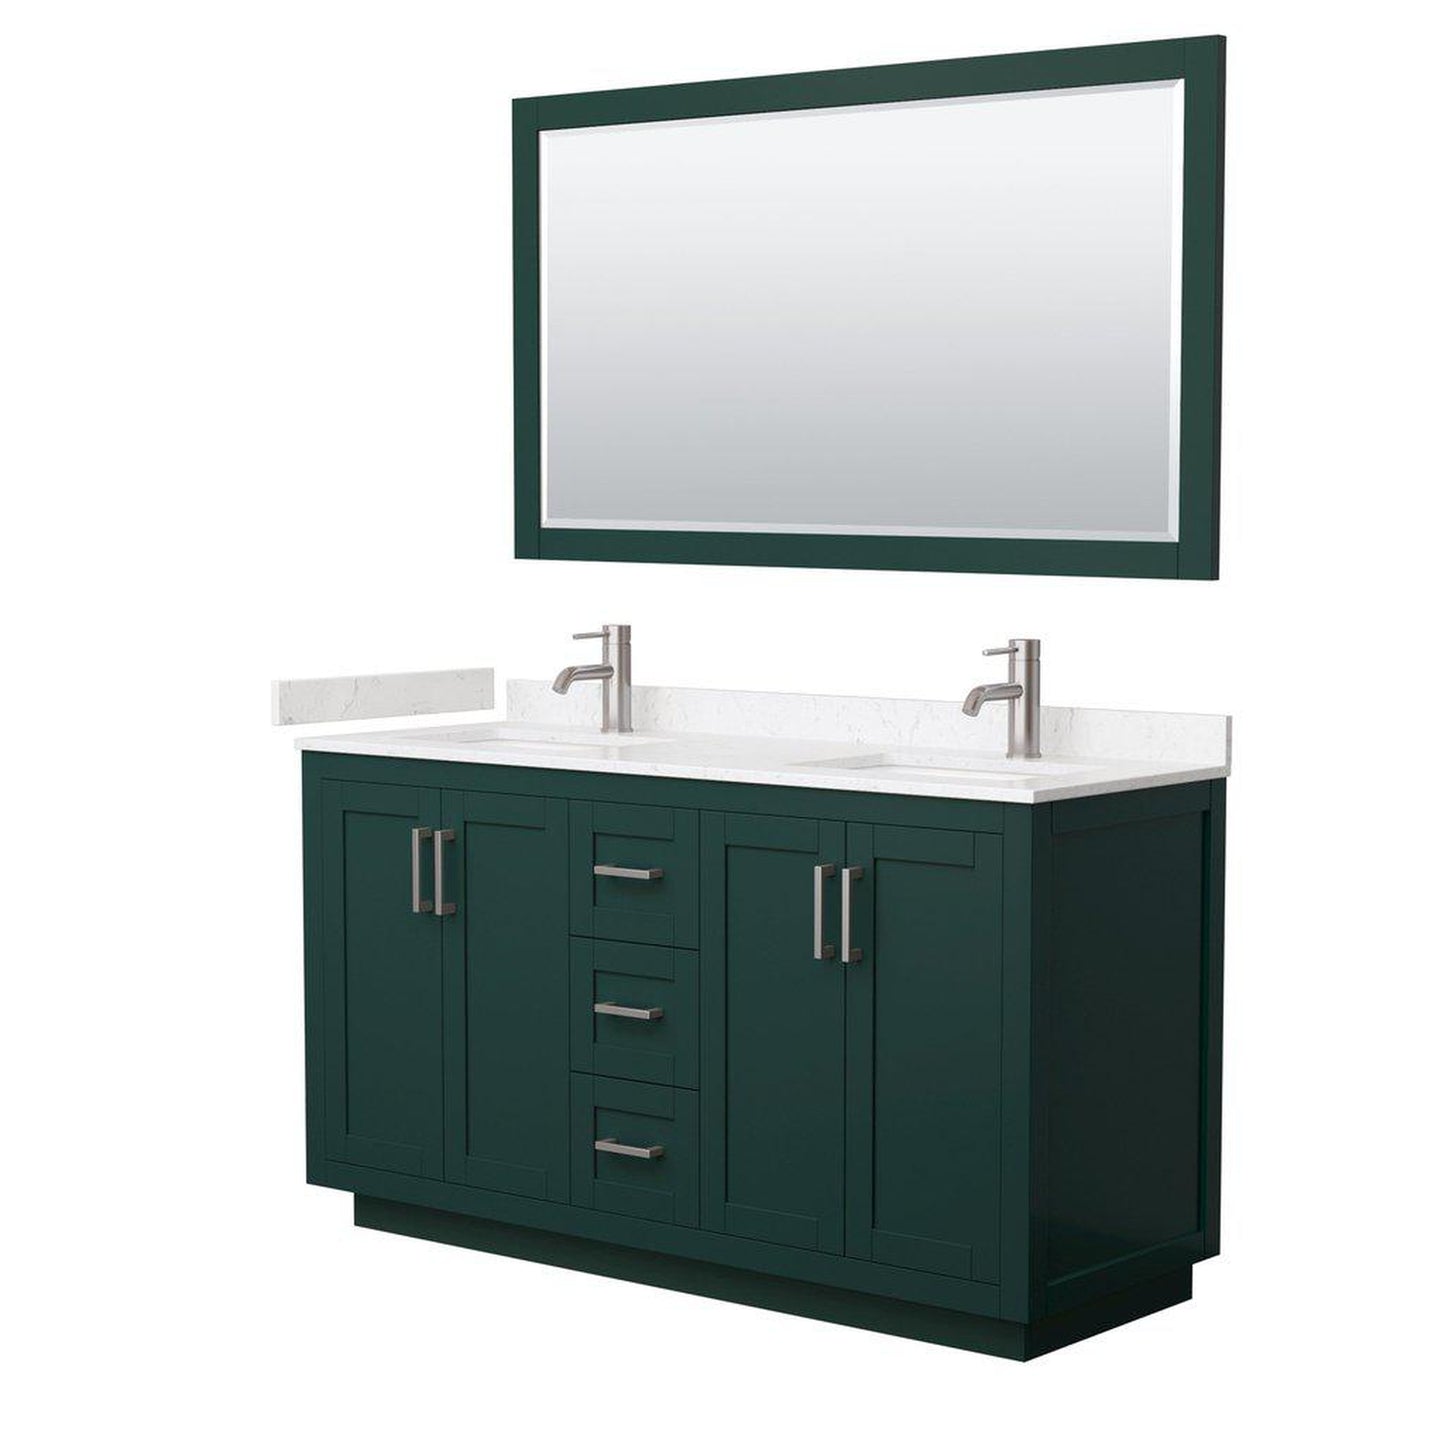 Wyndham Collection Miranda 60" Double Bathroom Green Vanity Set With Light-Vein Carrara Cultured Marble Countertop, Undermount Square Sink, 58" Mirror And Brushed Nickel Trim